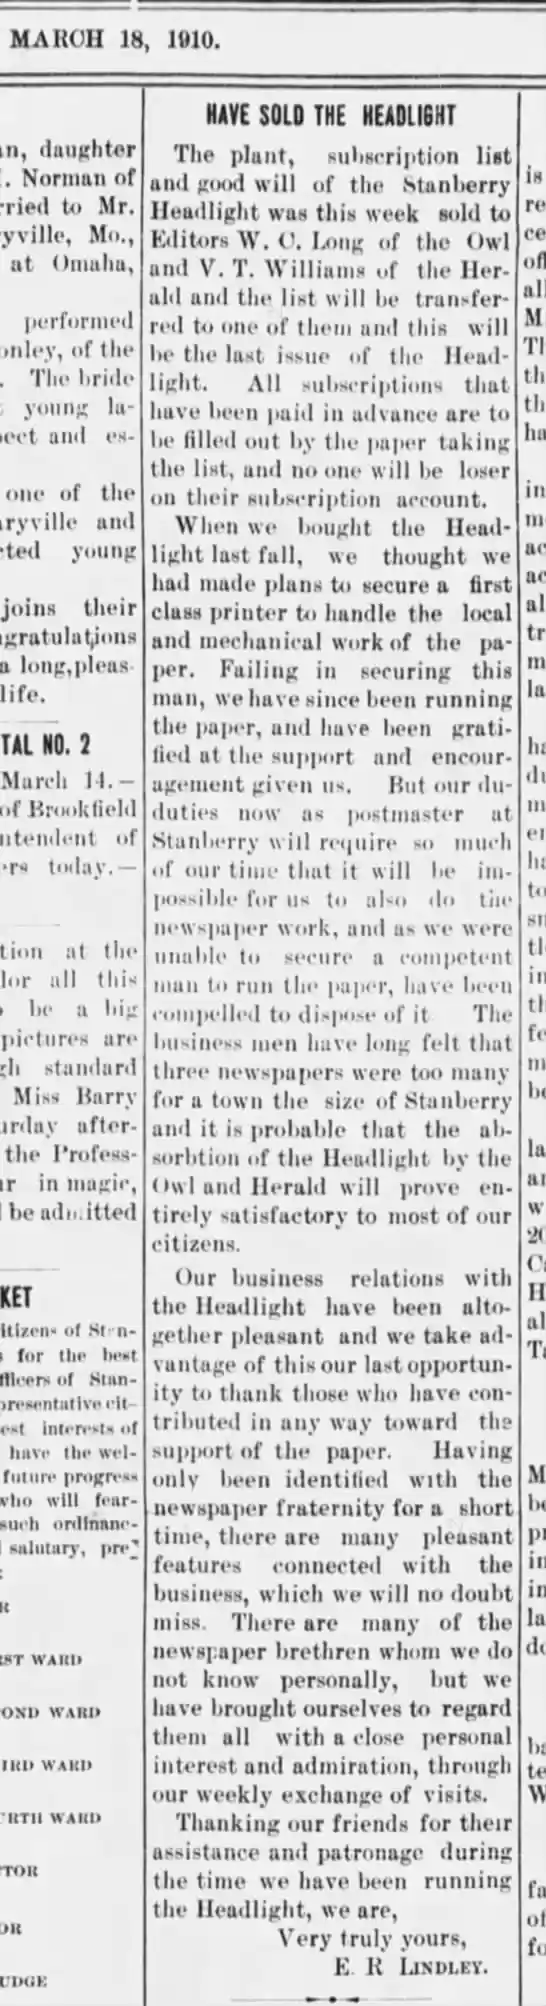 Sale of Headlight to Long Mar 18, 1910 issue